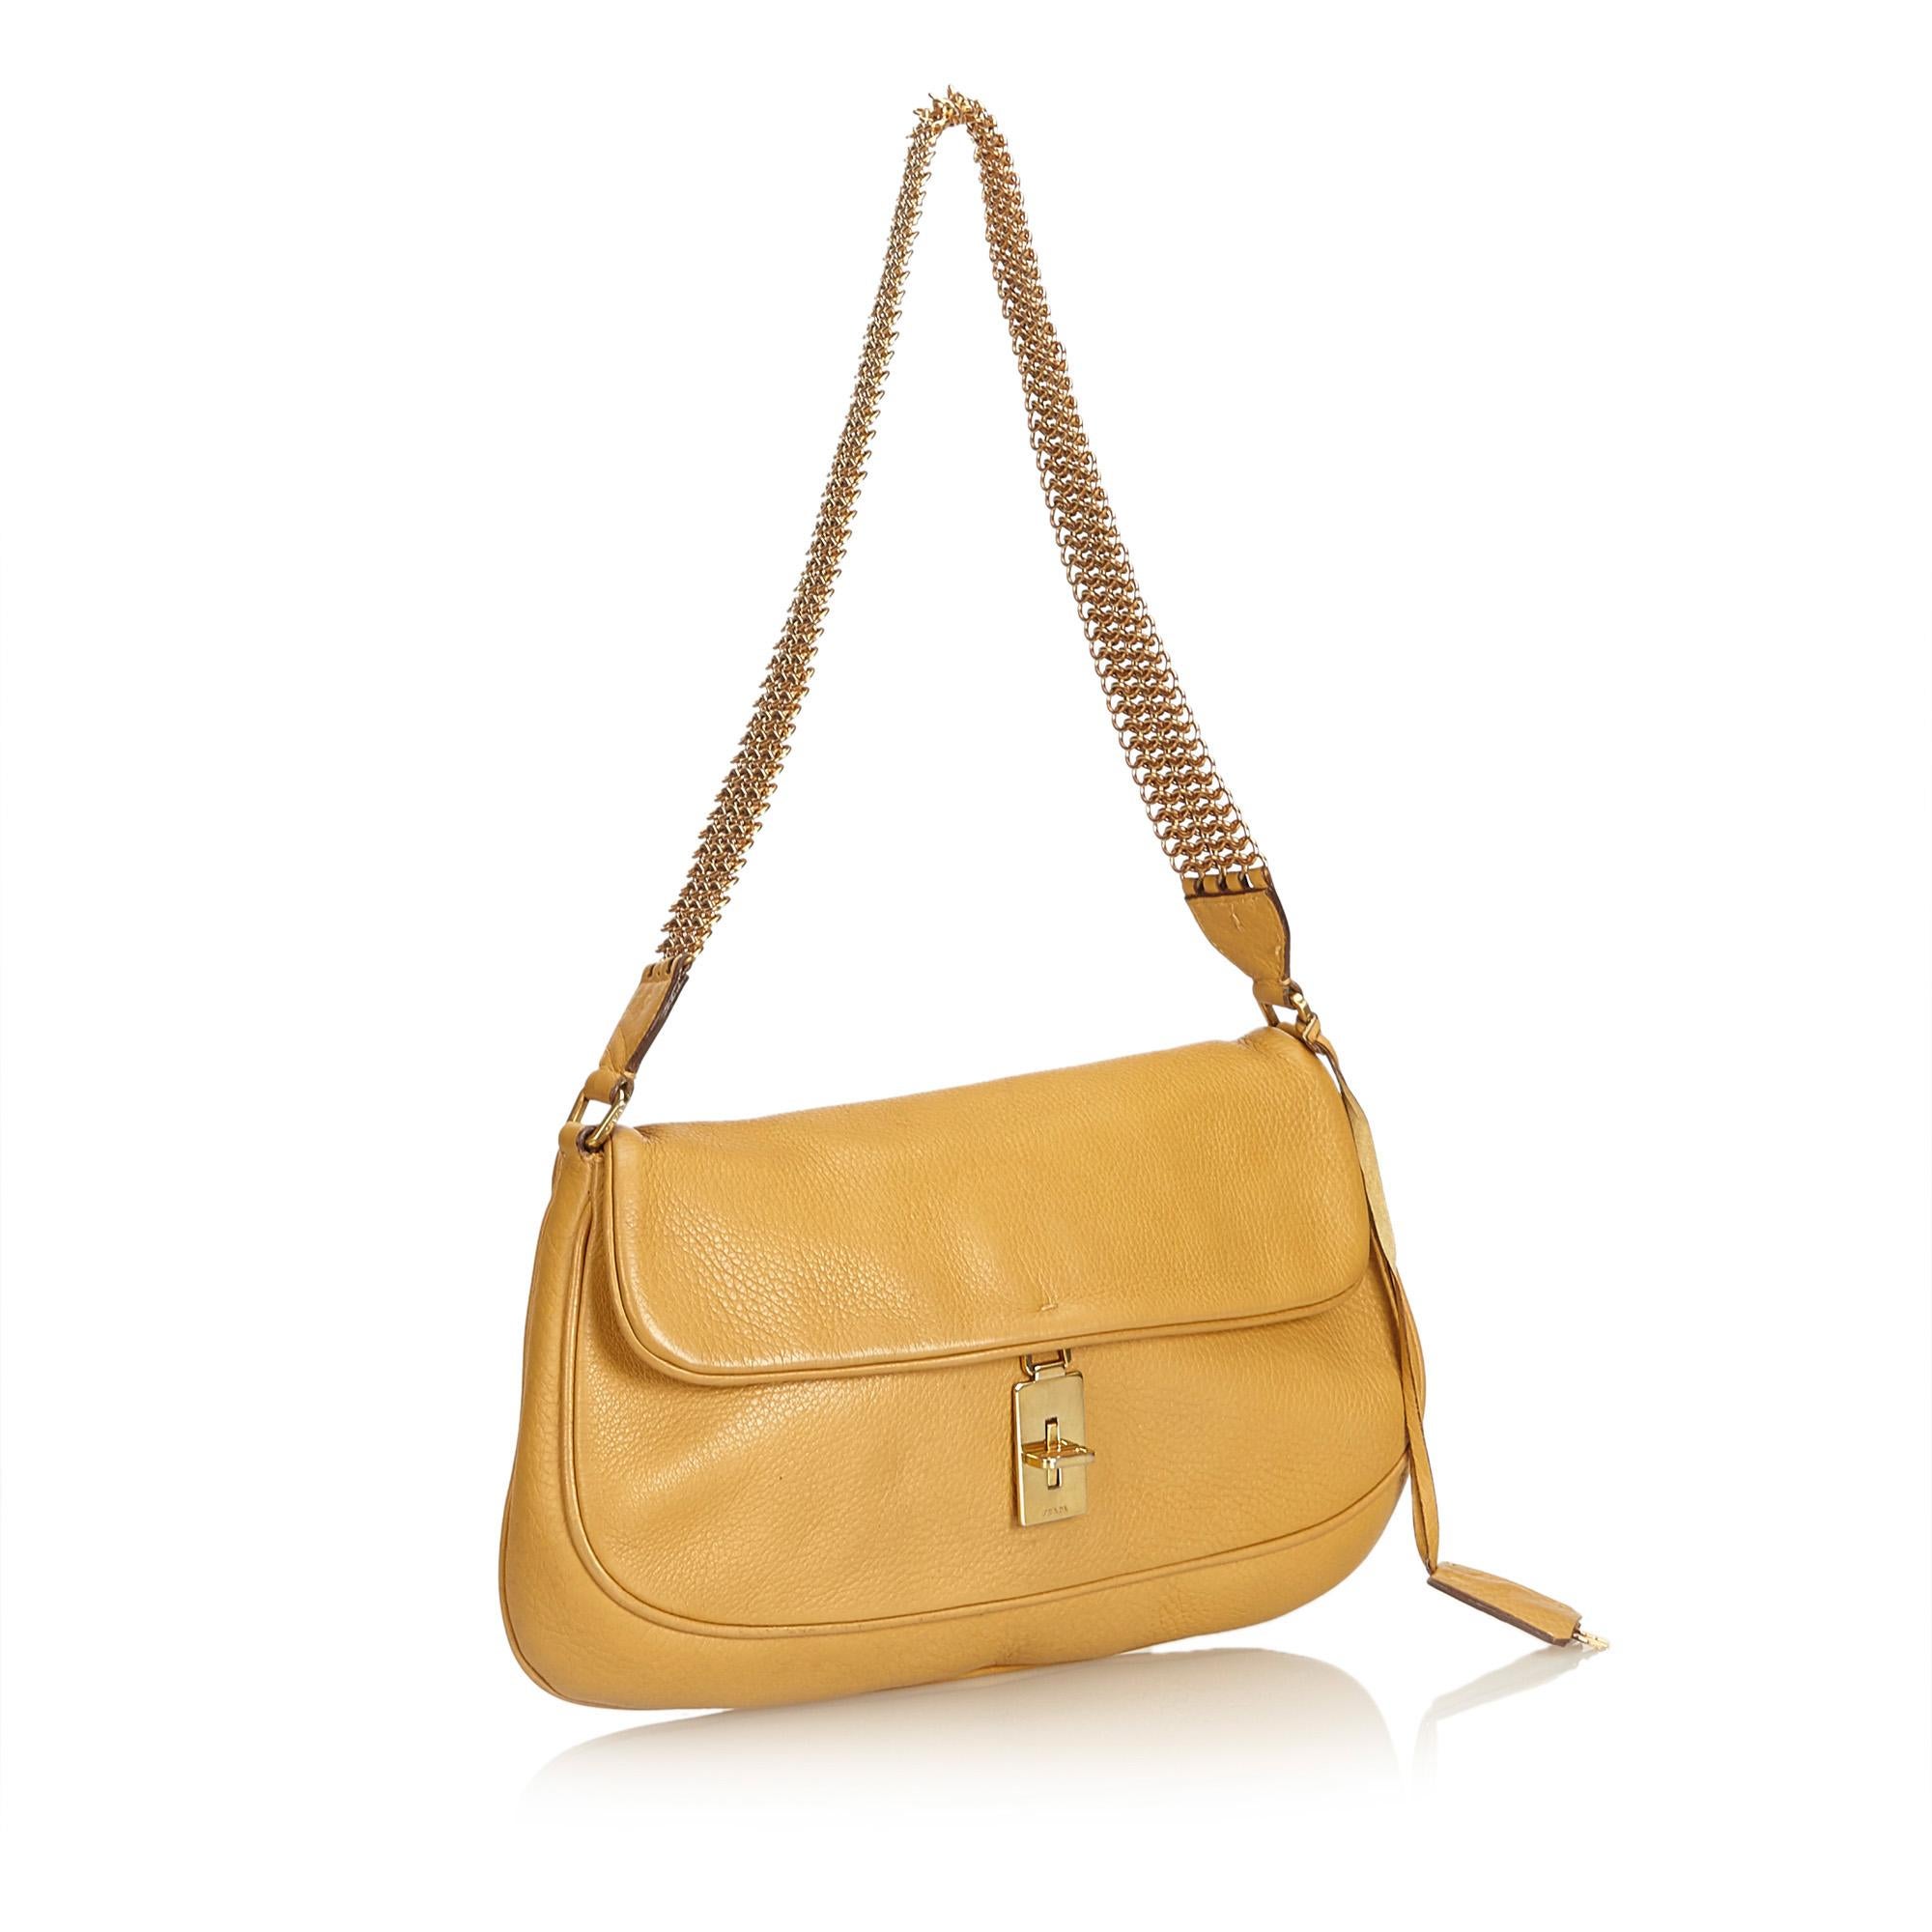 This shoulder bag features a leather body, chain straps, top flap with twist lock closure, exterior slip pocket, and interior zip pocket.

It carries a AB condition rating.

Dimensions: 
Length 18.00 cm
Width 31.00 cm
Depth 1.00 cm
Shoulder Drop